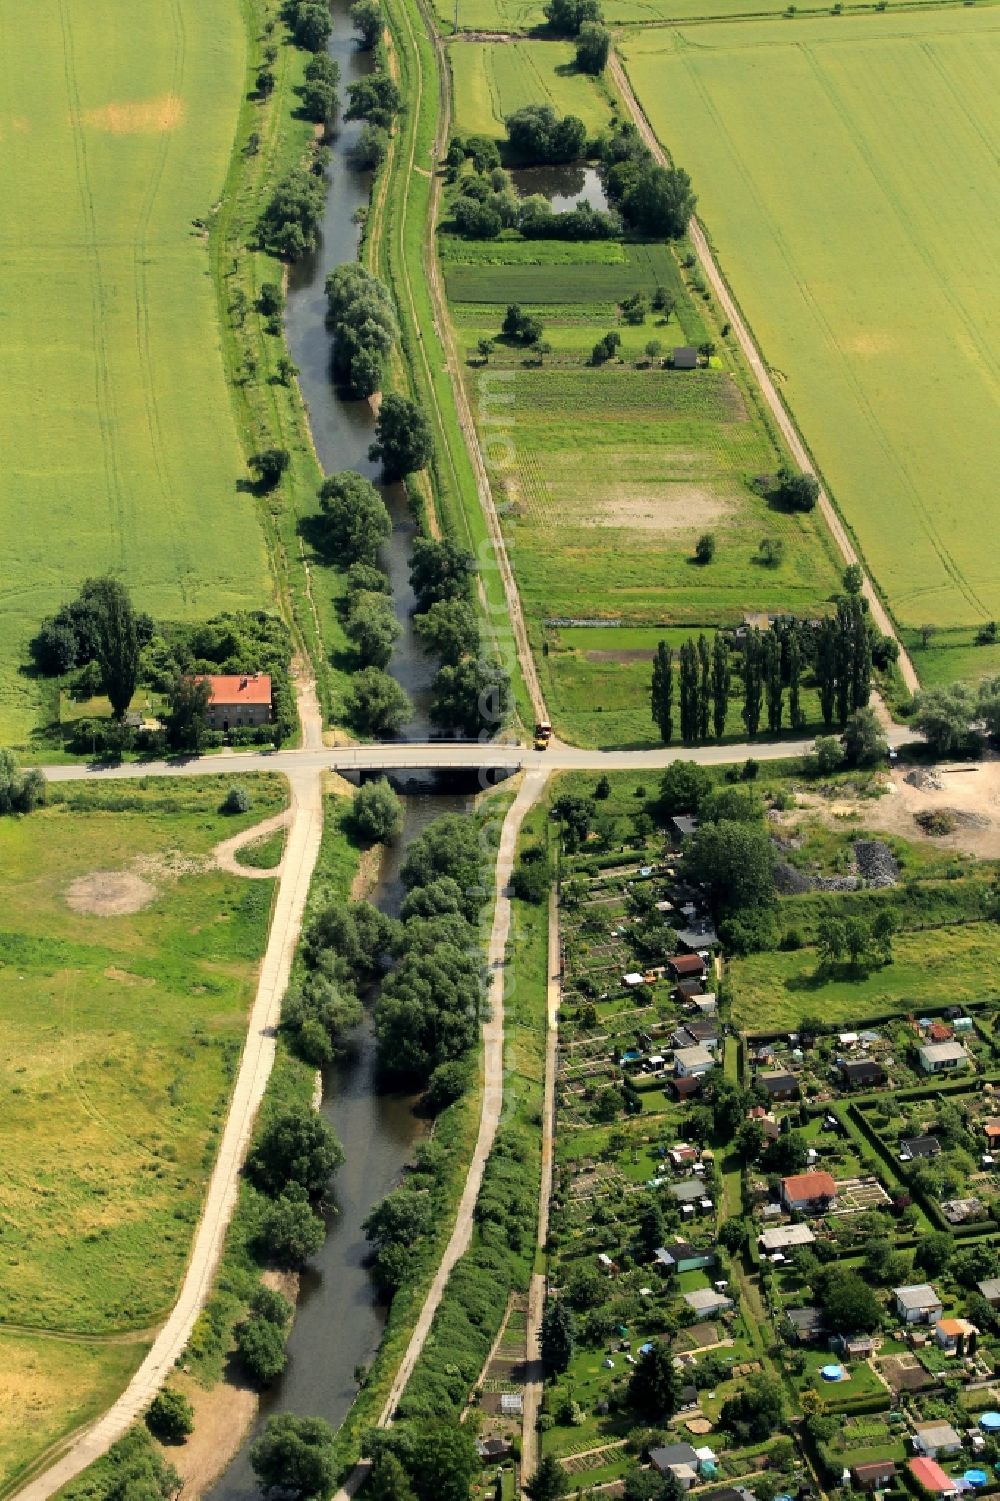 Aerial image Walschleben - The river Gera flows at Walschleben in Thuringia past. In the environment of the river is the garden colony Gera Aue. The Bahnhofstrasse road crosses the bridge over the river